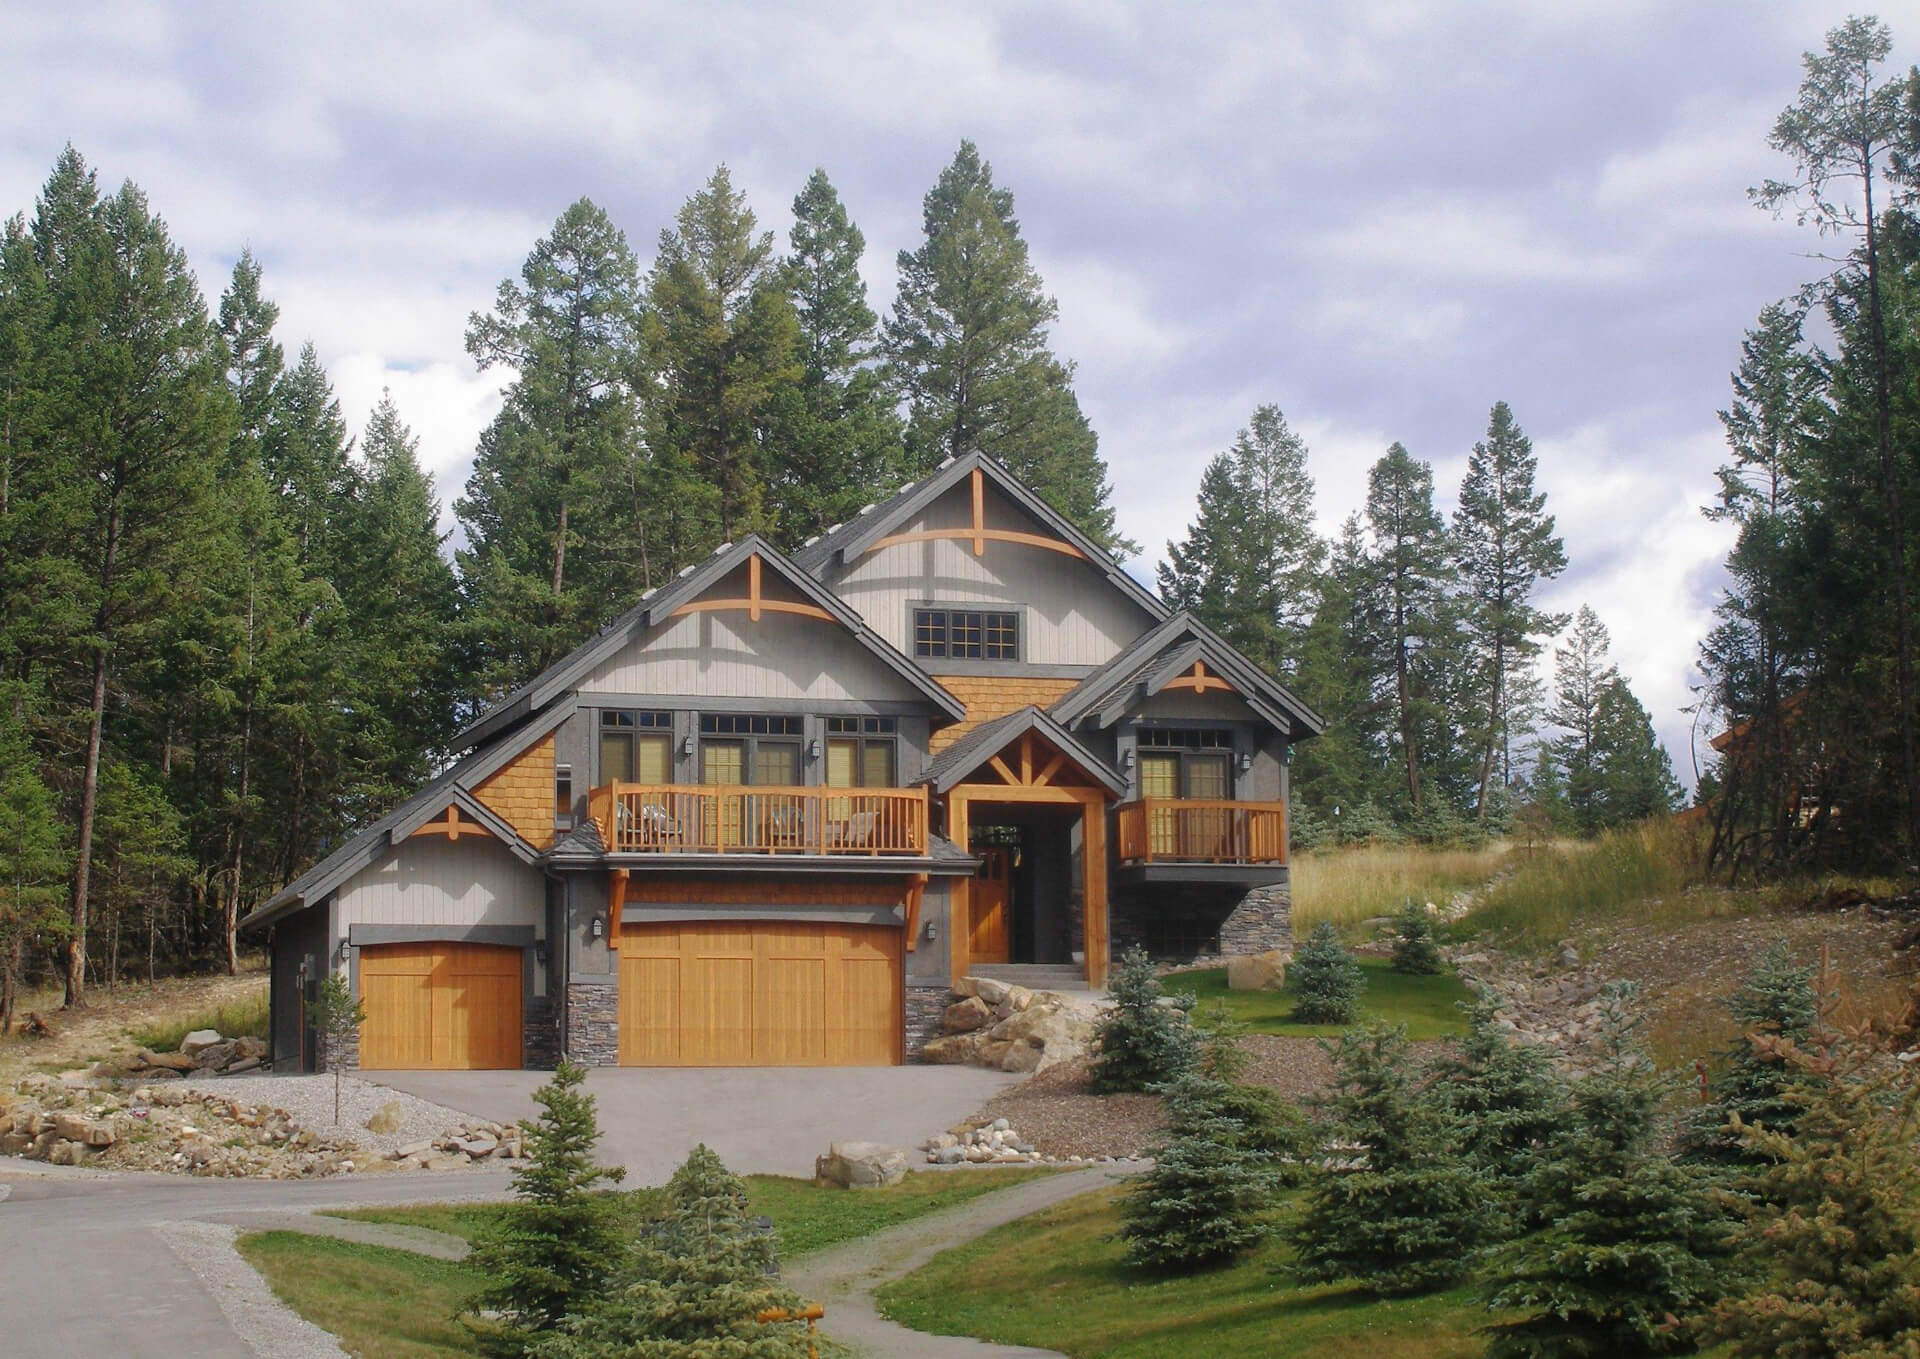 A tall alpine styled house with large window features and a single garage